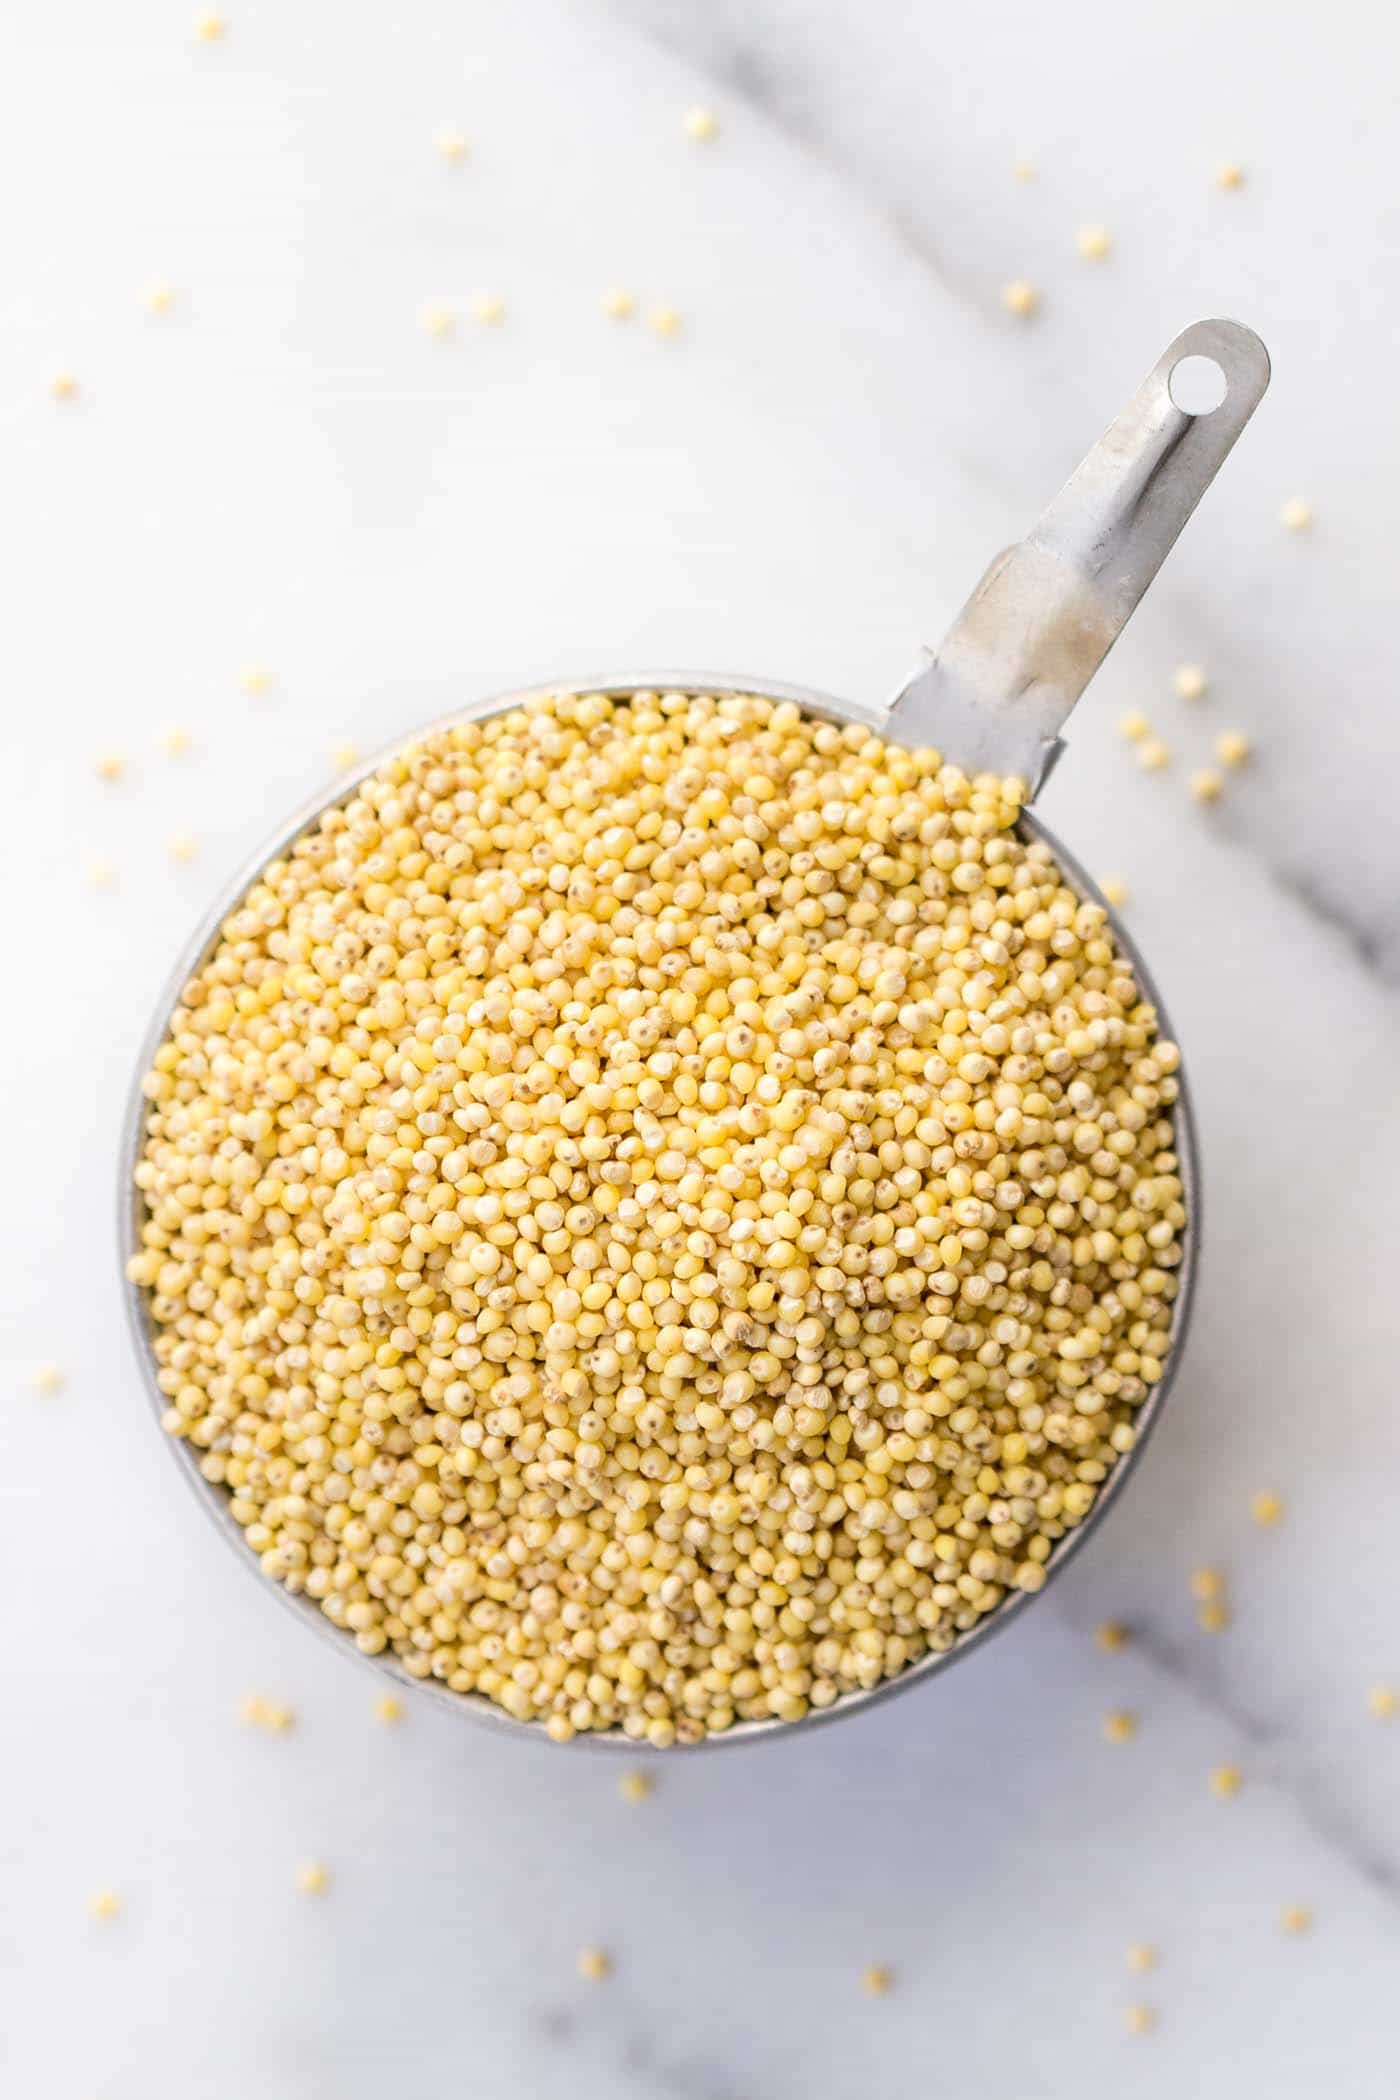 MILLET: one of the six staple whole grains you should have you in your pantry!